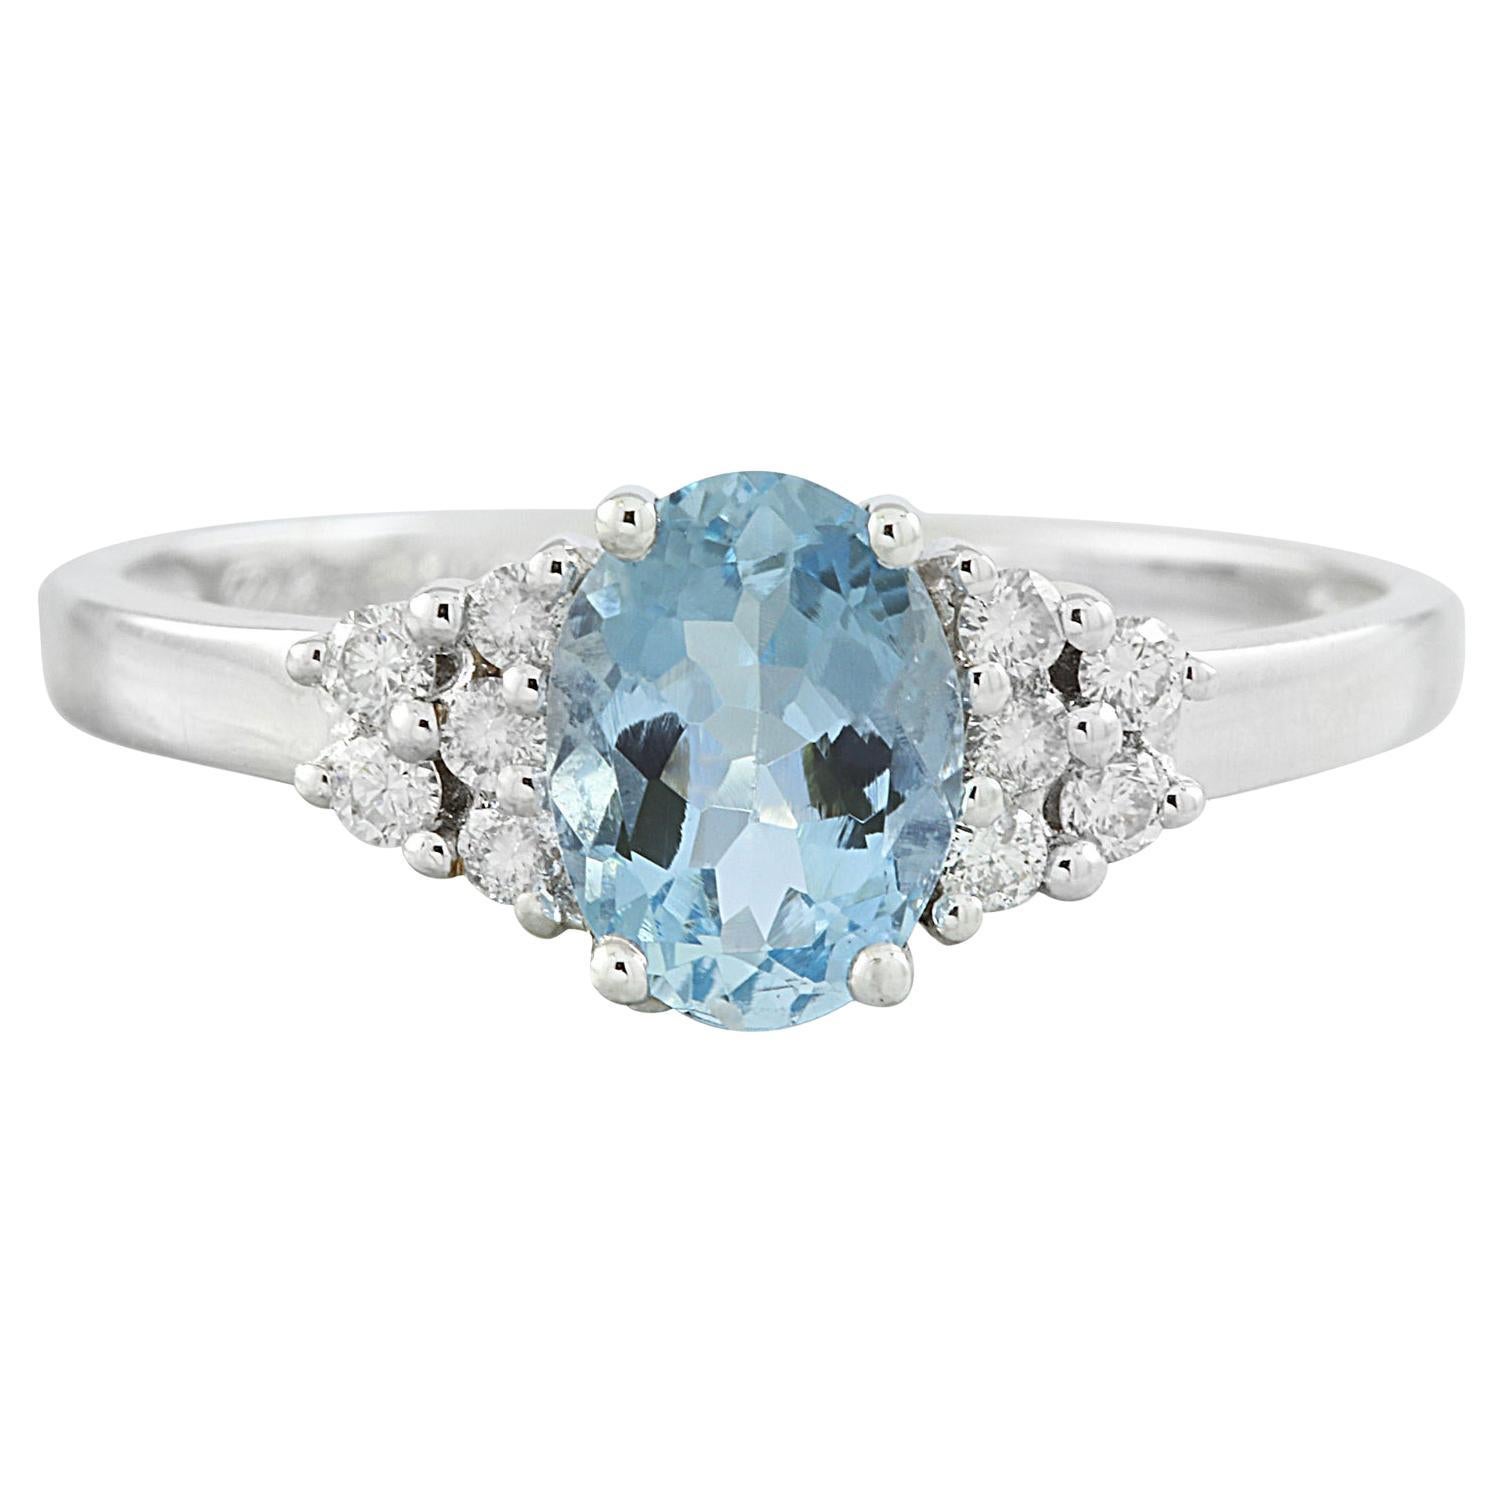 Exquisite Natural Sky Blue Topaz Diamond Ring in 14K Solid White Gold For Sale